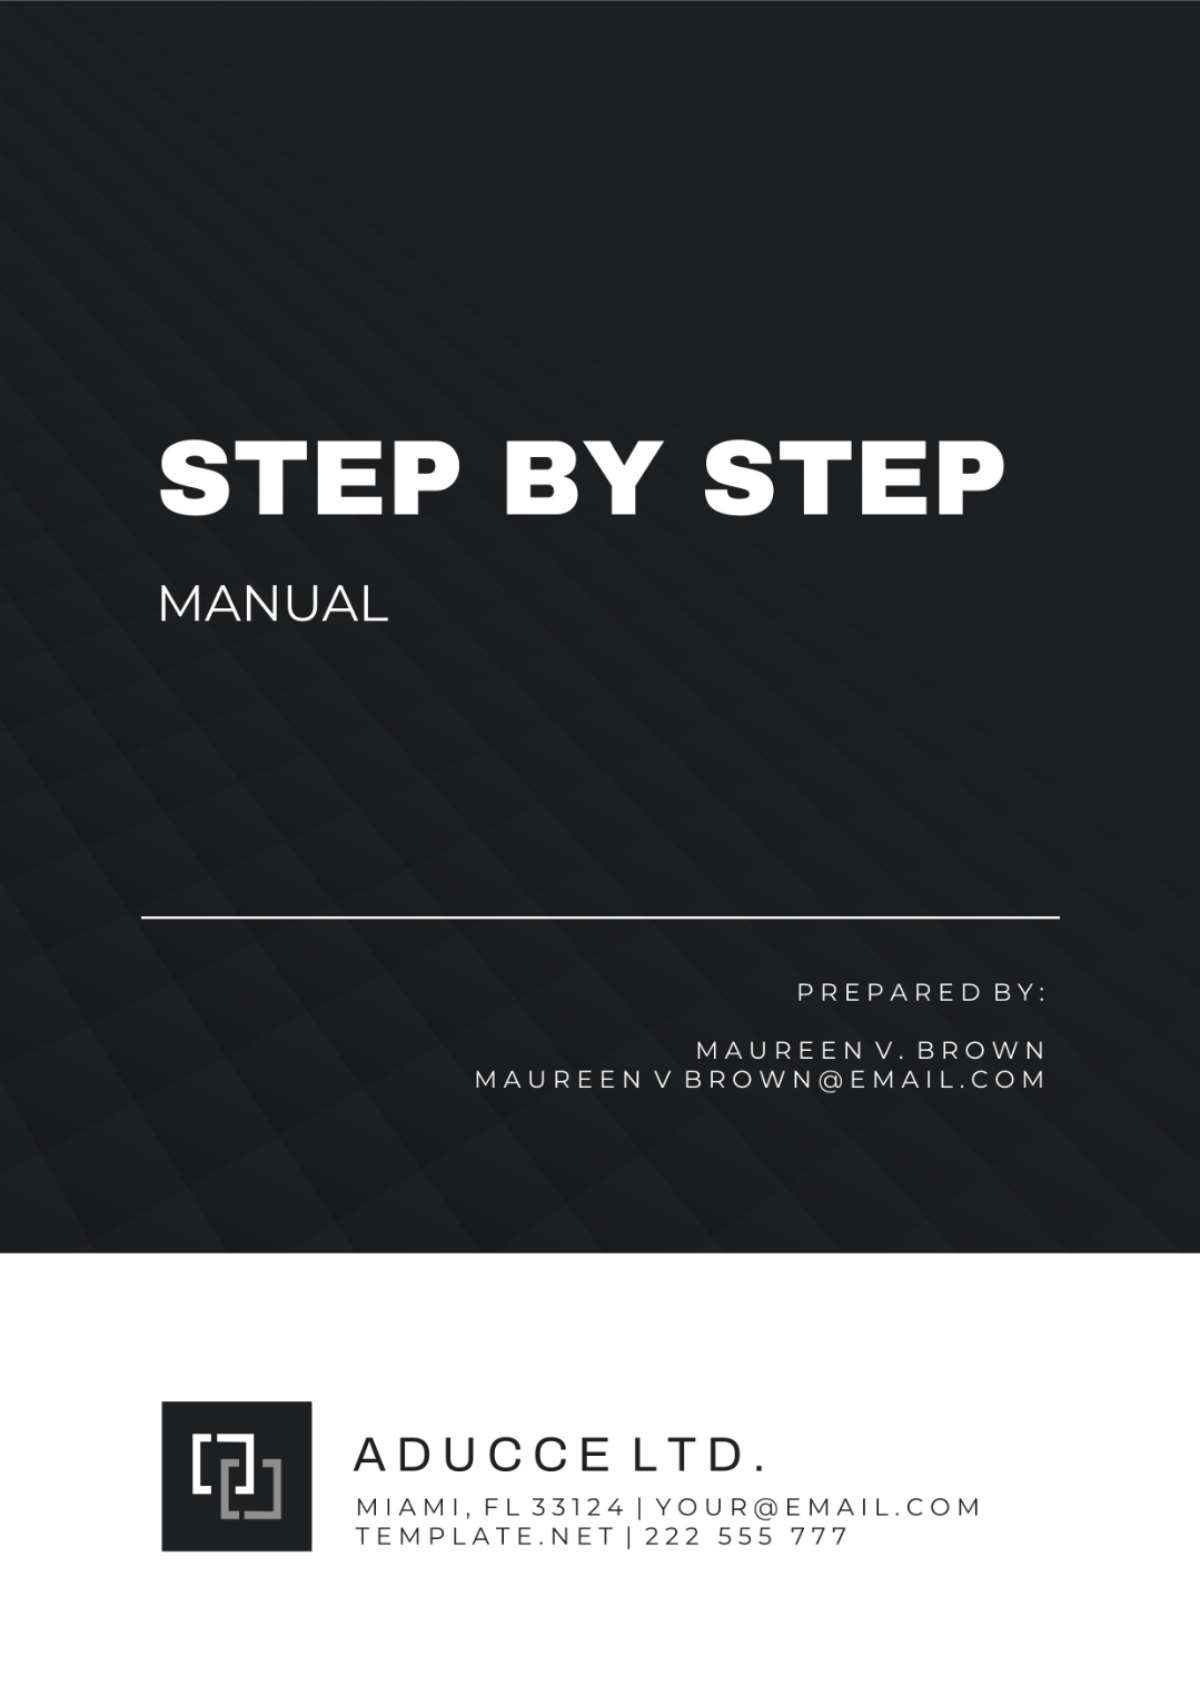 Step by Step Manual Template